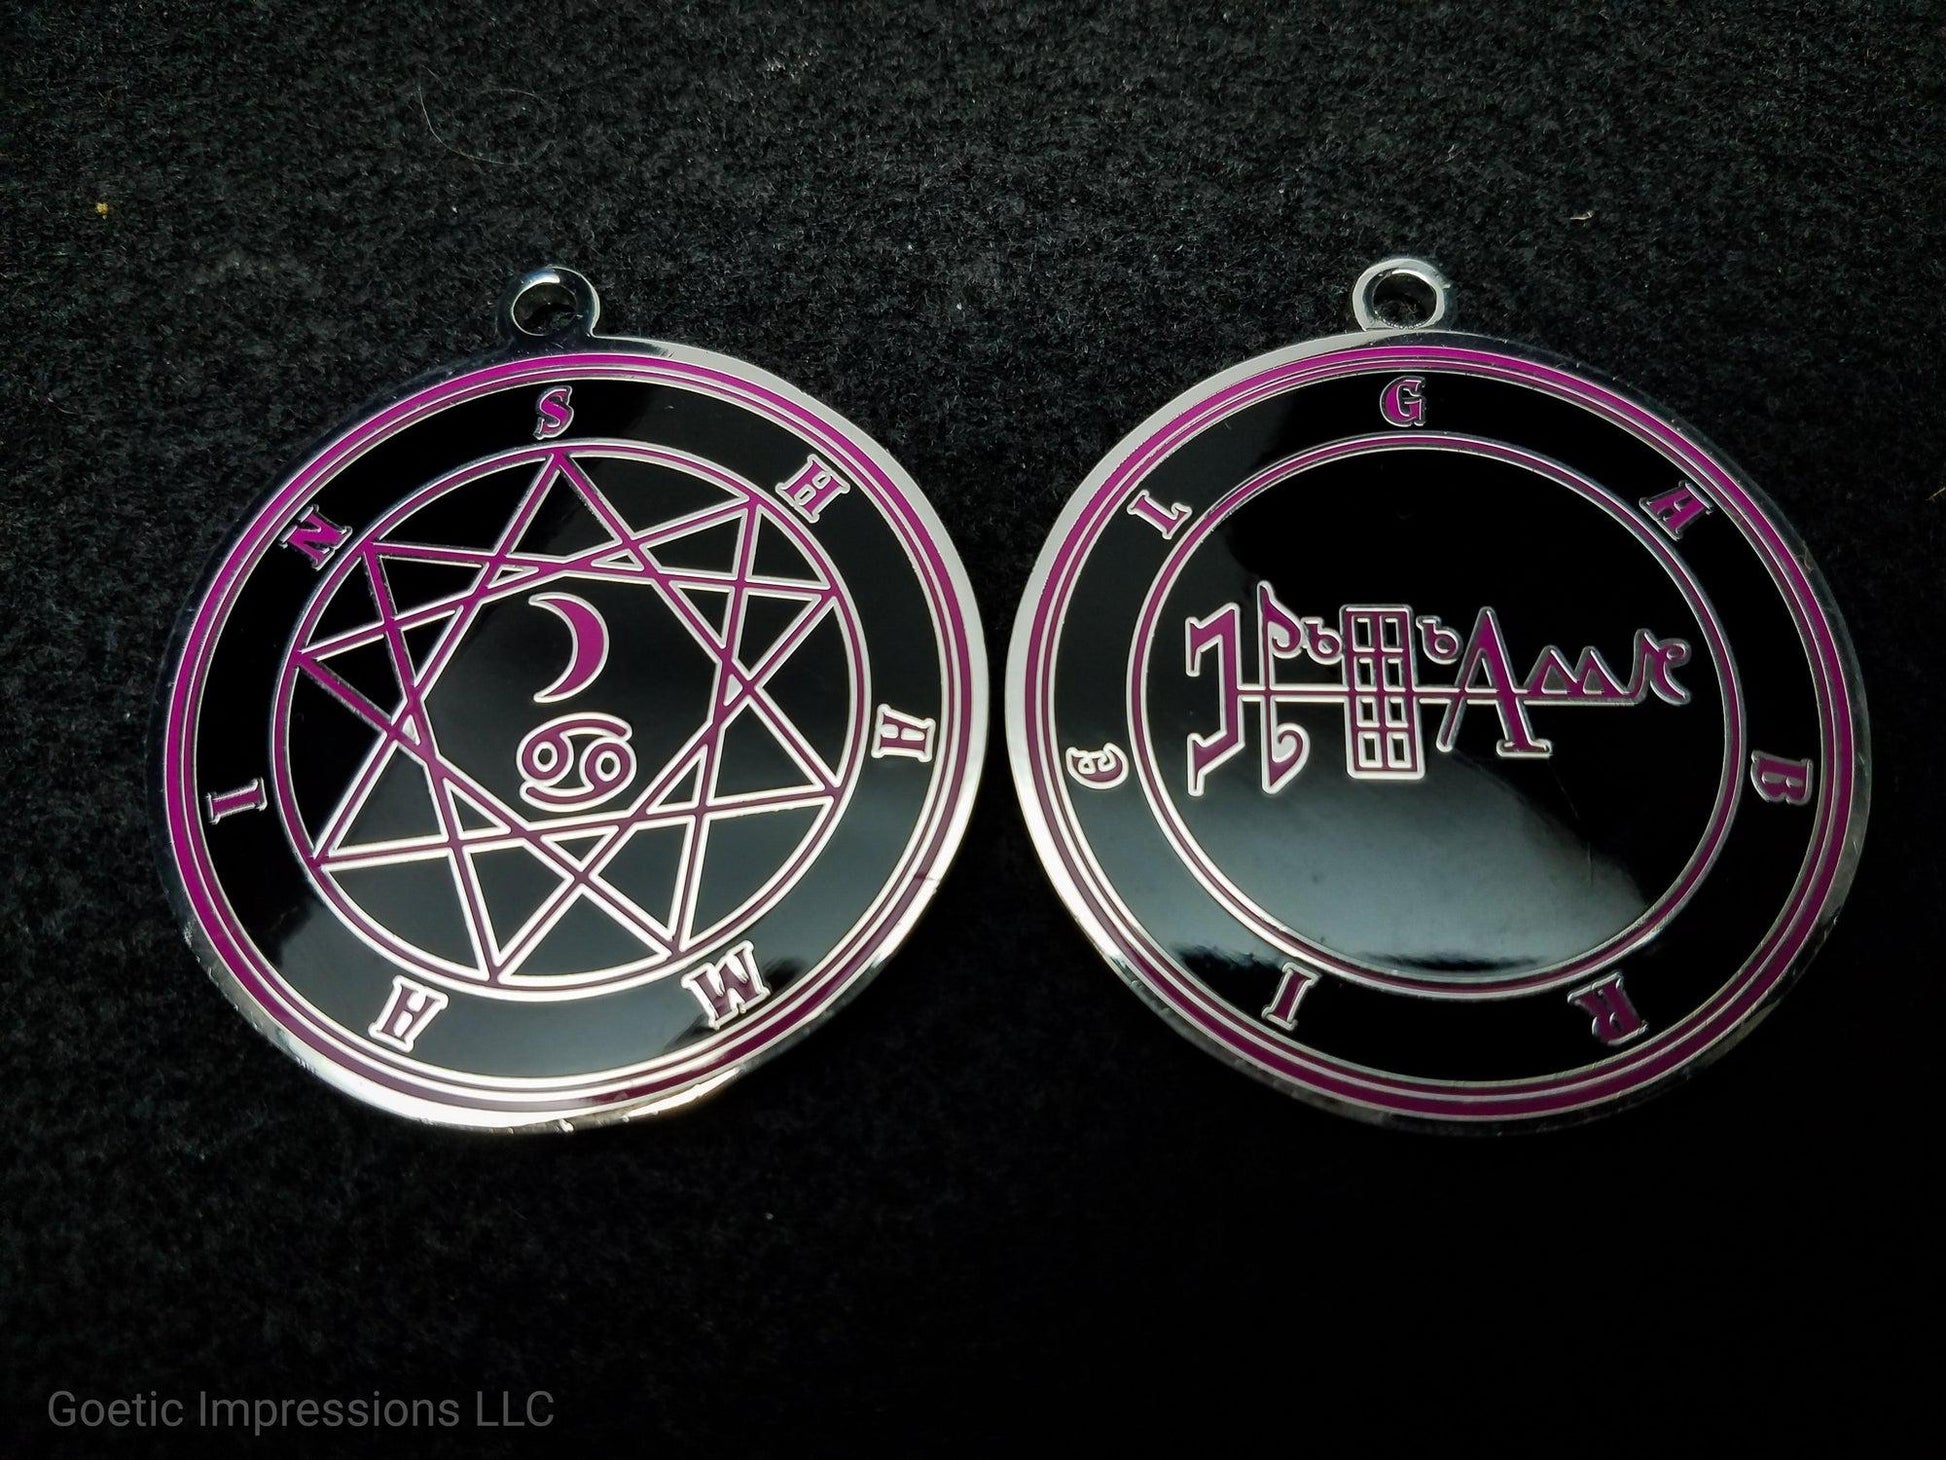 Heptameron Inspired Archangel Talisman featuring the seal and sigils of Archangel Gabriel.  Featuring on the reverse side of the talsiman, the Heaven Shamain and astrological symbols of the Moon and Cancer based on Cornelius Agrippa